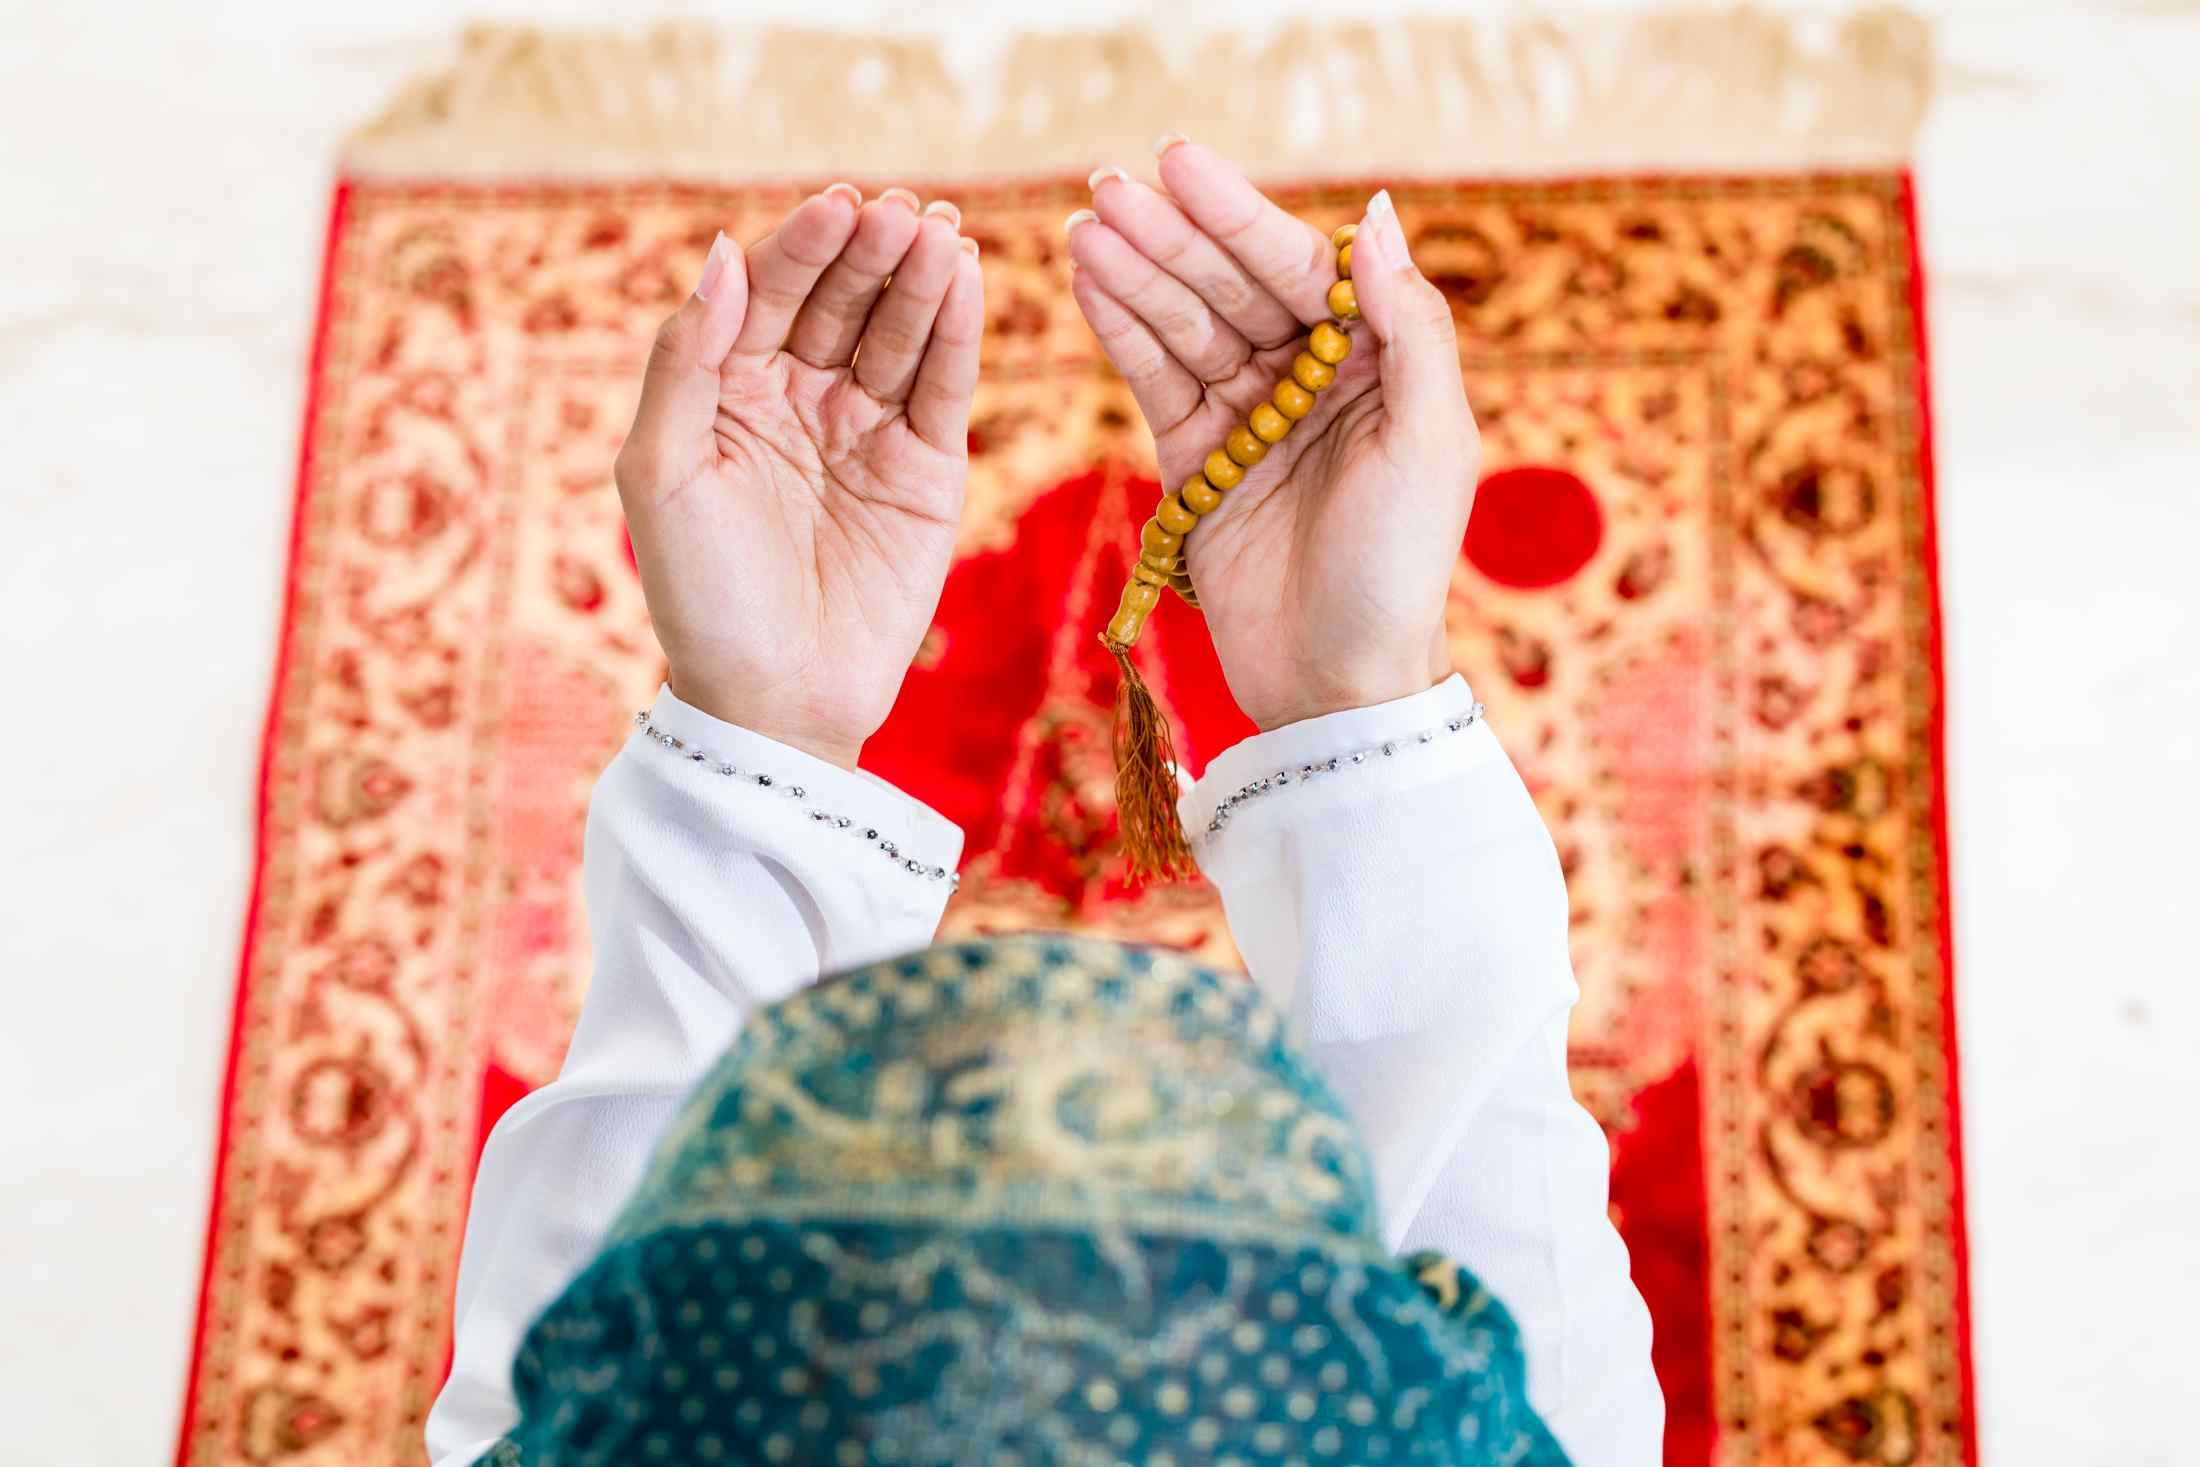 Did the Prophet (PBUH) Discourage Women’s Visits to Mosque?